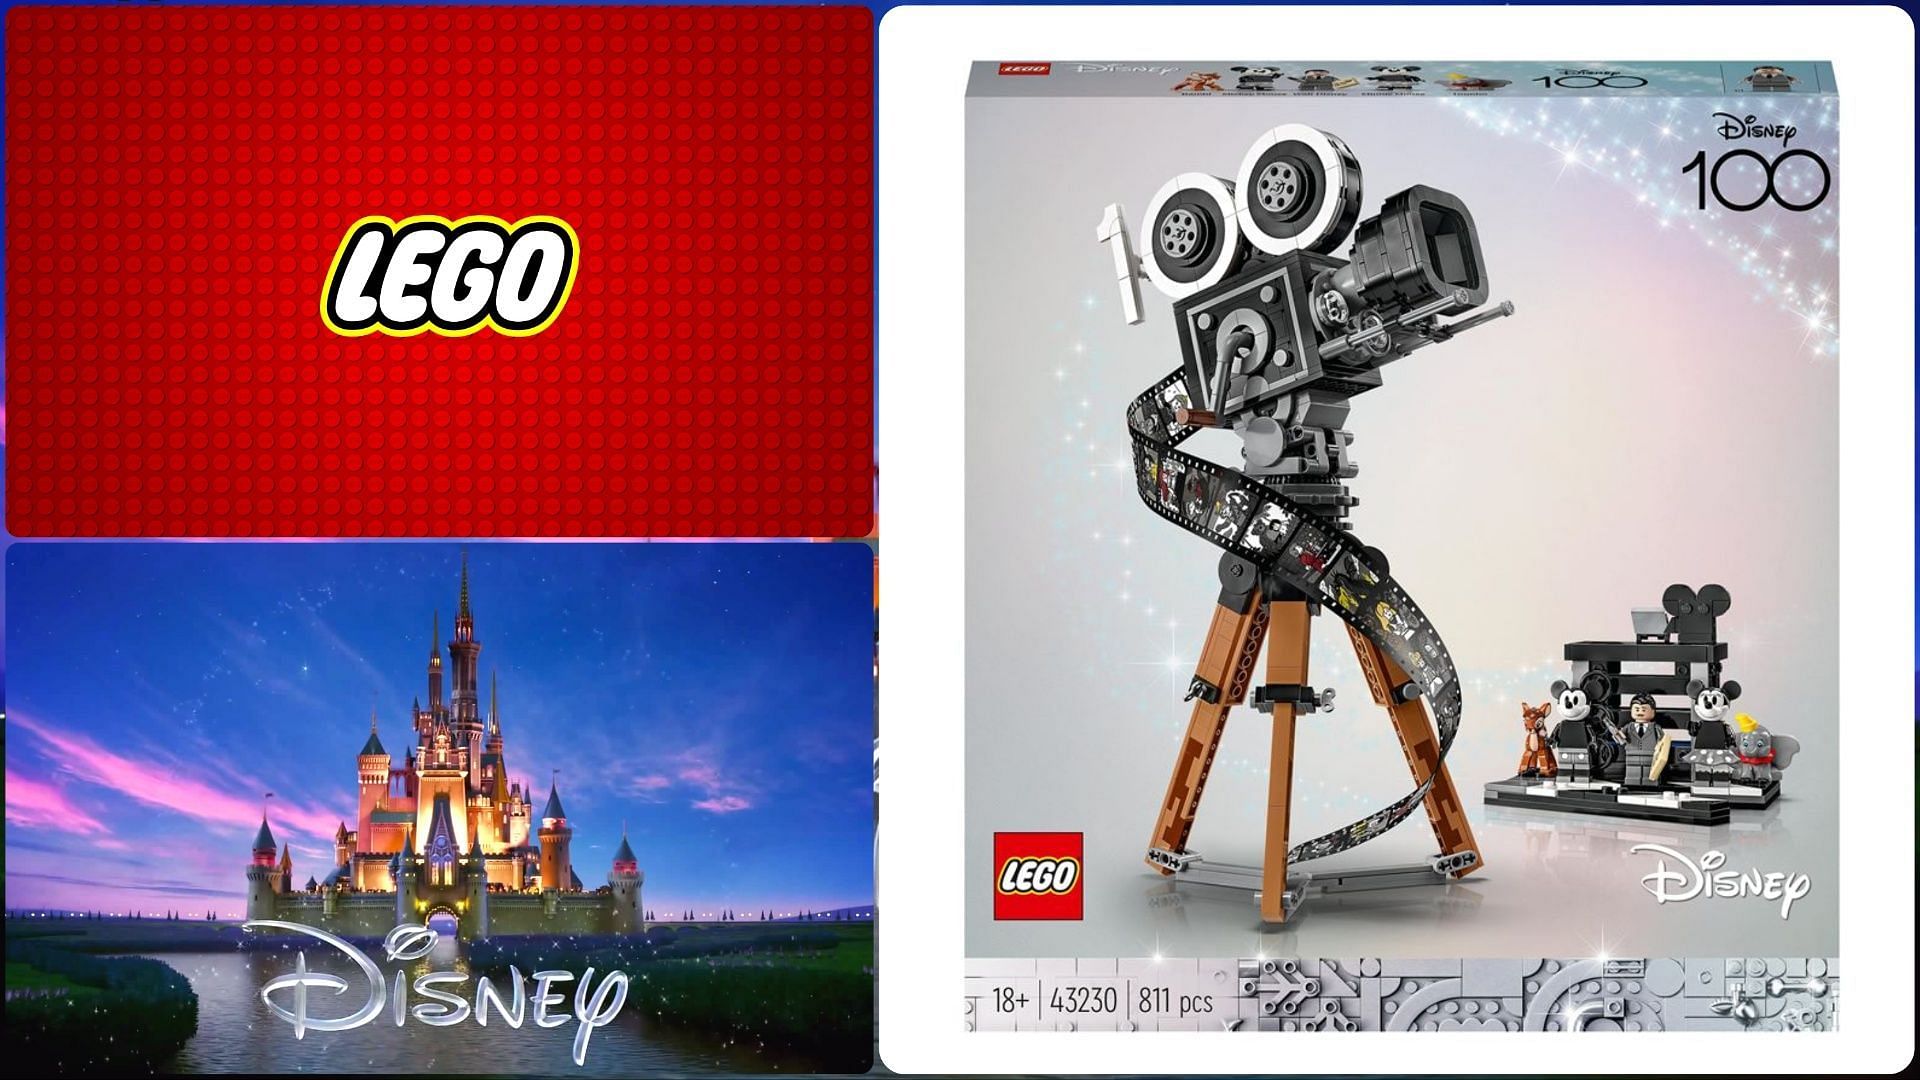 Disney 100 Lego camera: Where to buy, release date, price, and all you need  to know